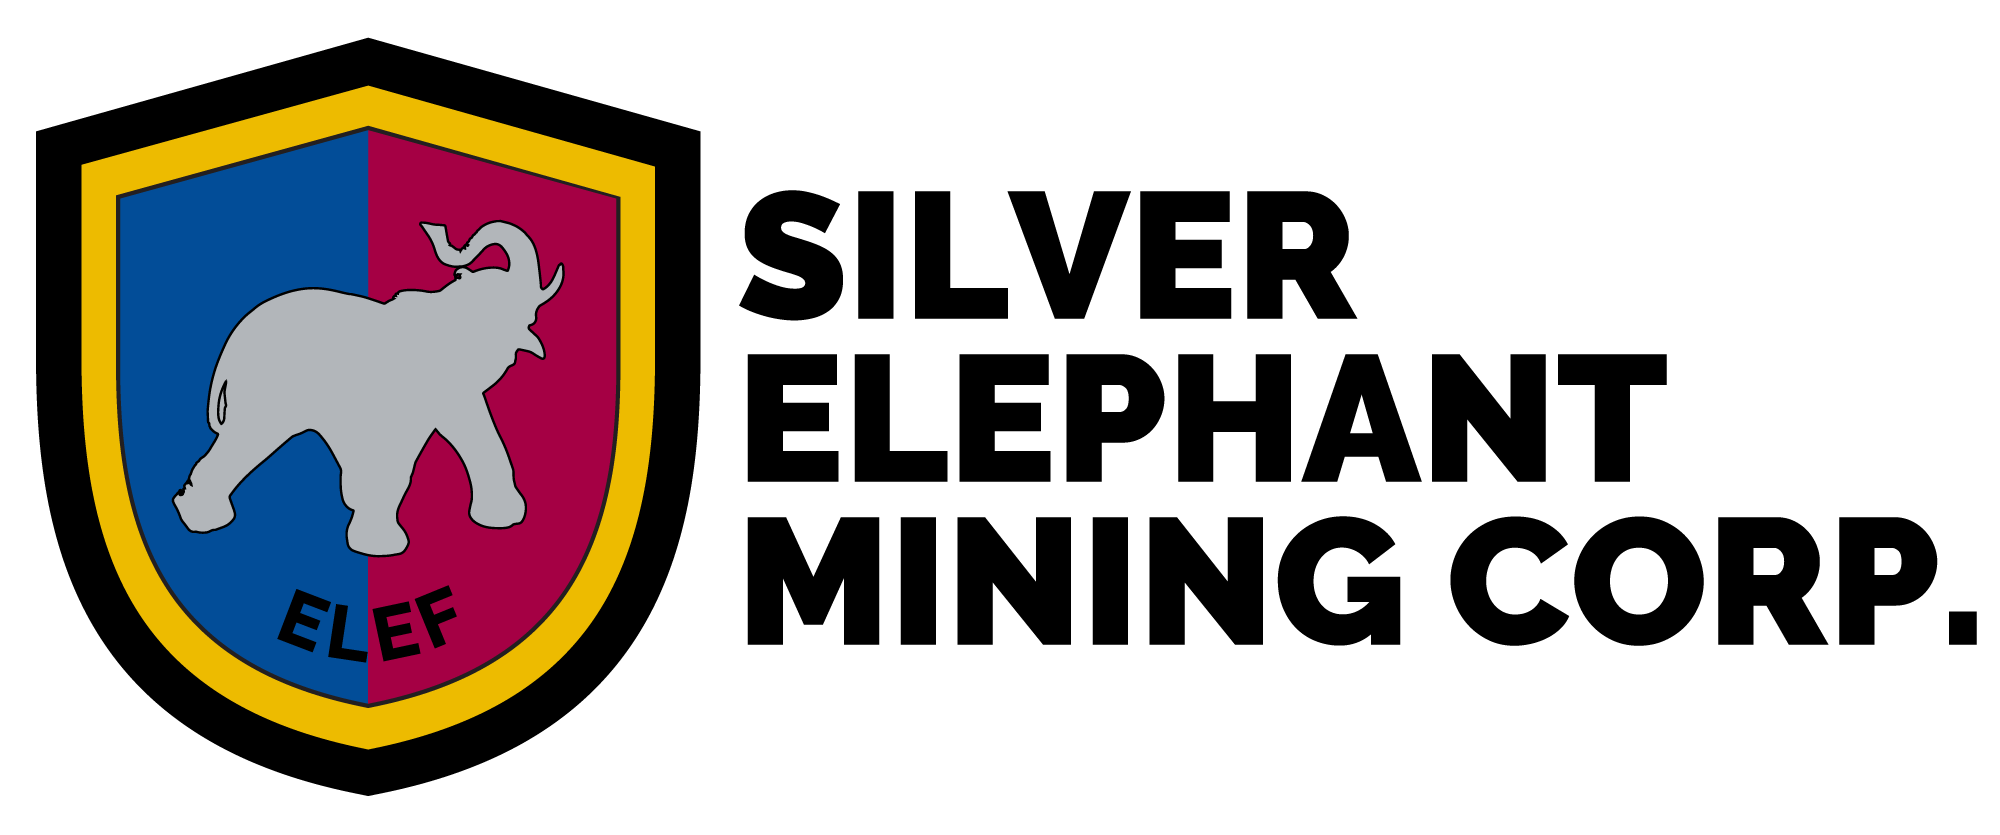 Silver Elephant Mining Corp., Monday, September 6, 2021, Press release picture